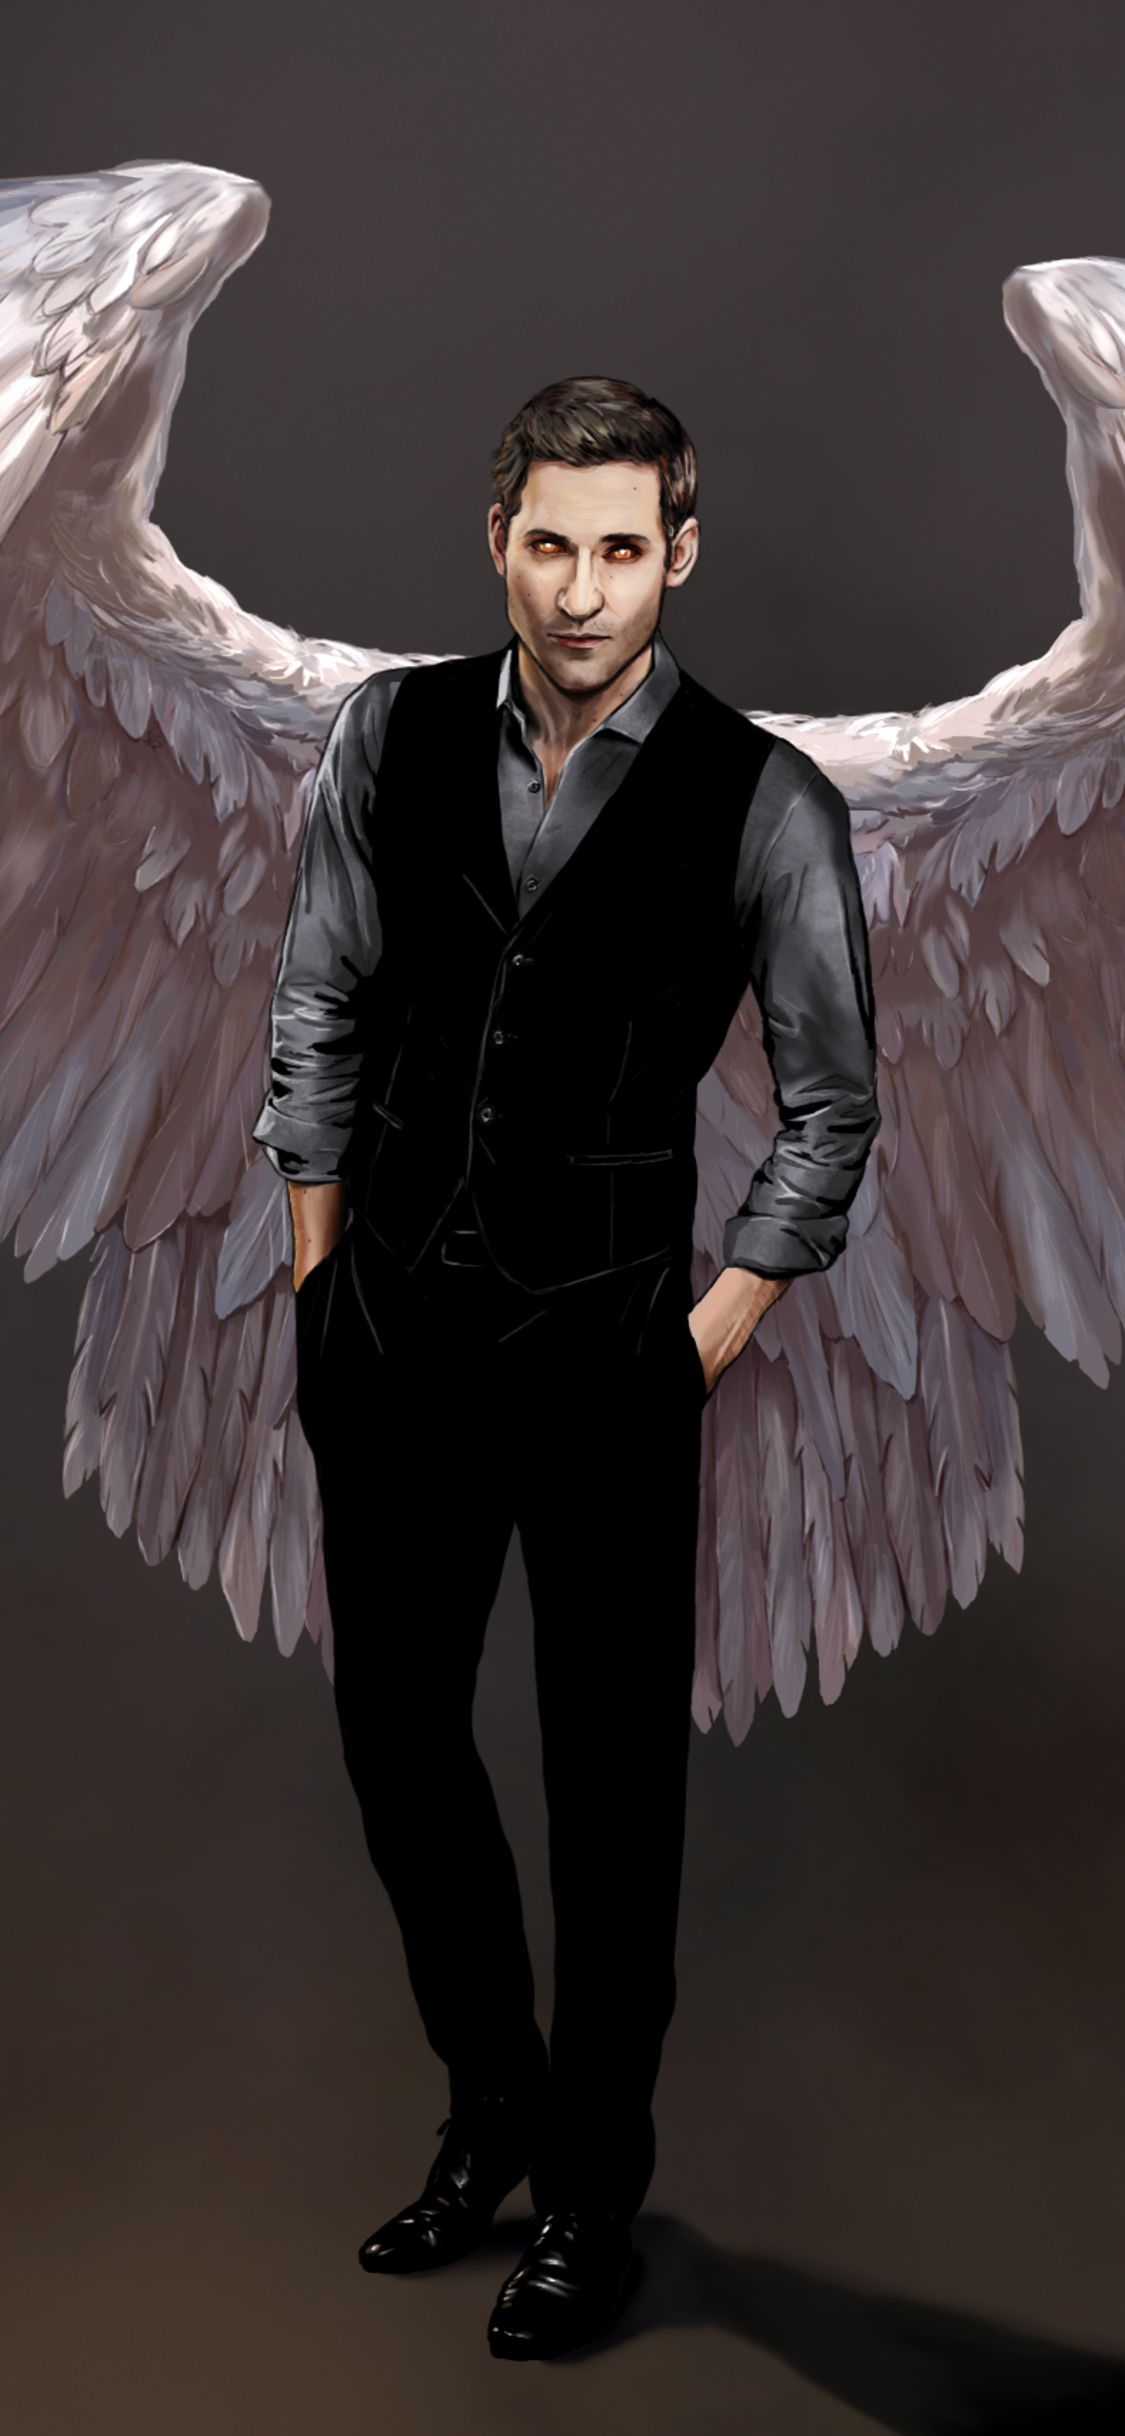 Lucifer iPhone Wallpaper Free Lucifer iPhone Background